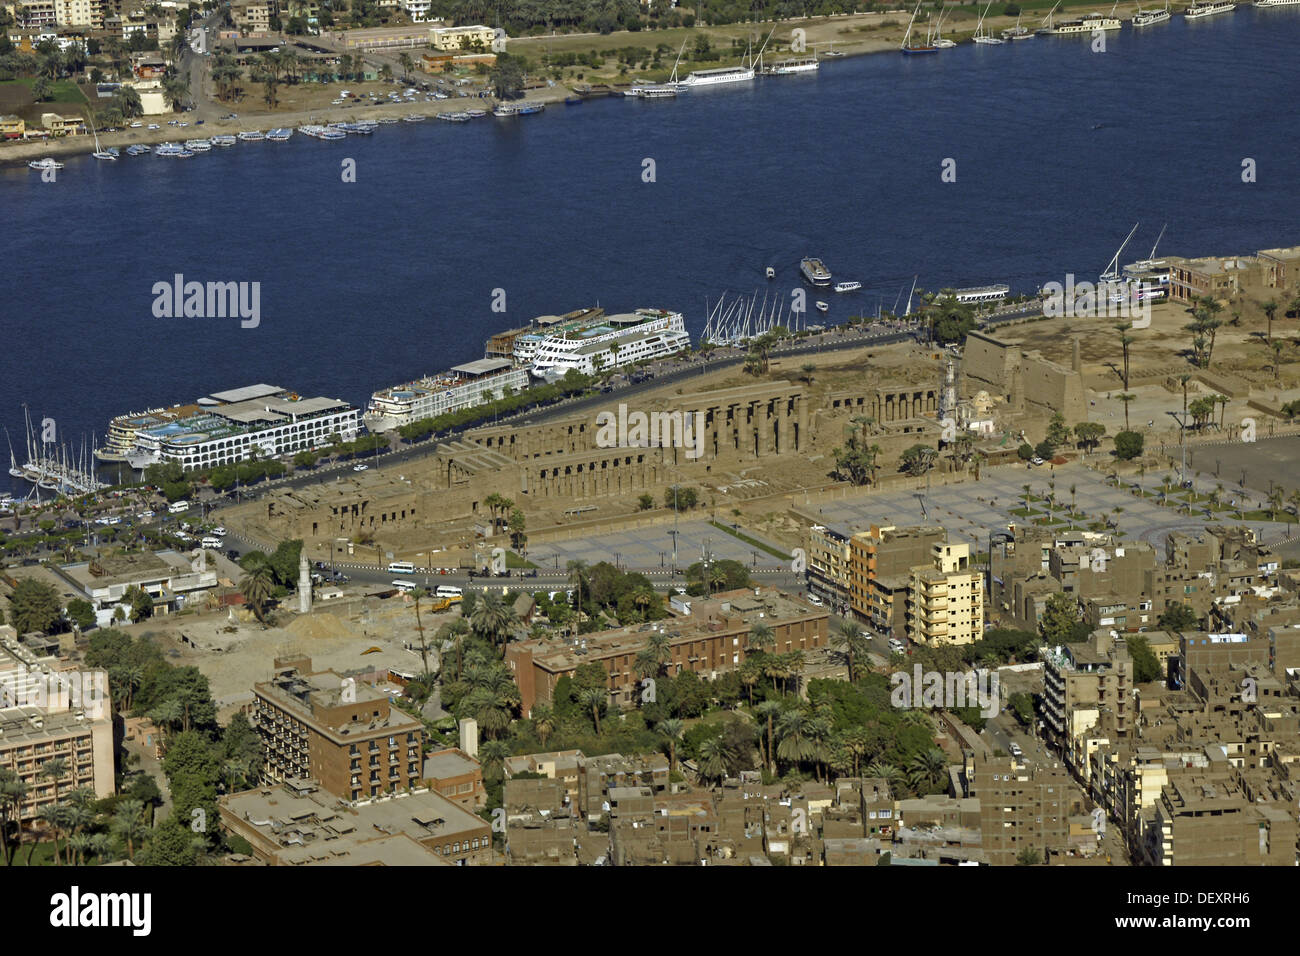 nile-river-valley-from-the-air-luxor-and-the-temple-of-luxor-egypt-DEXRH6.jpg